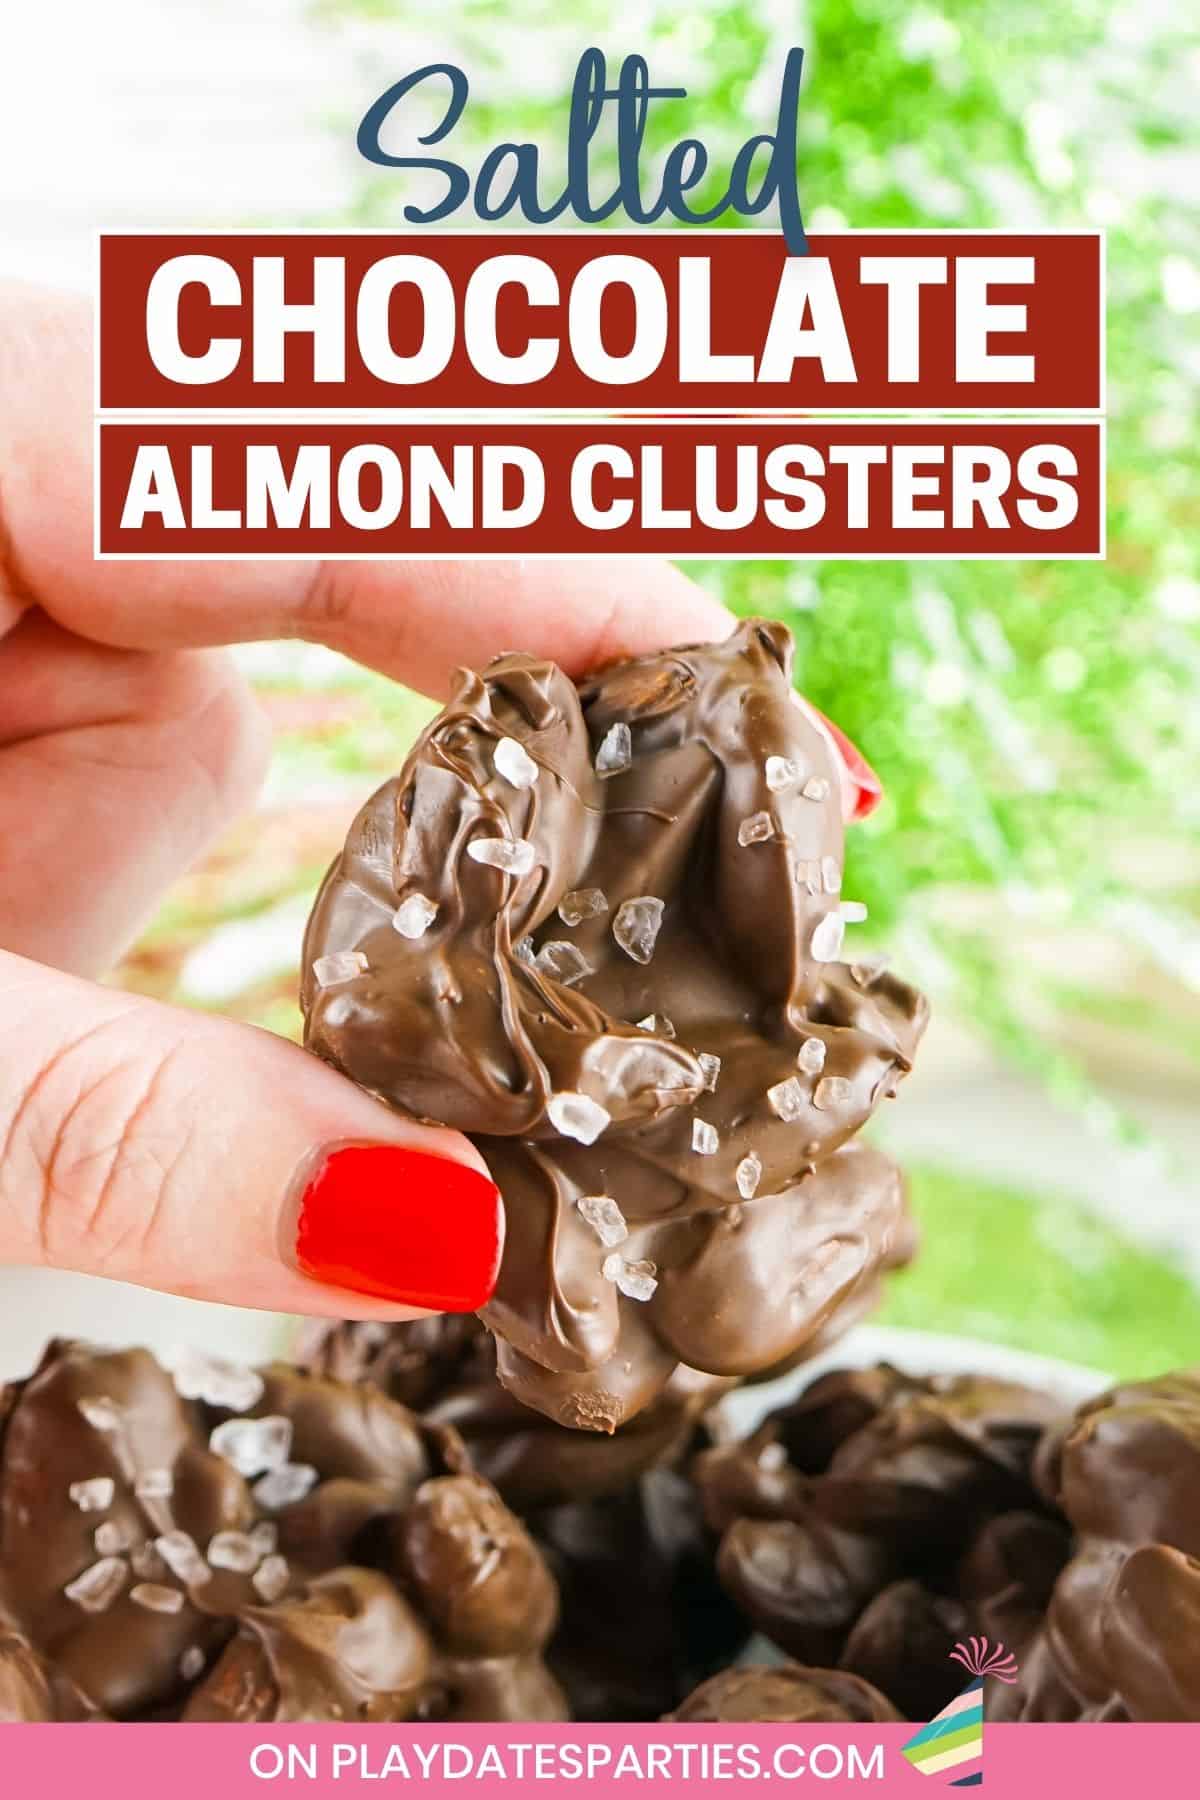 Salted Chocolate Almond Clusters Pin Image.